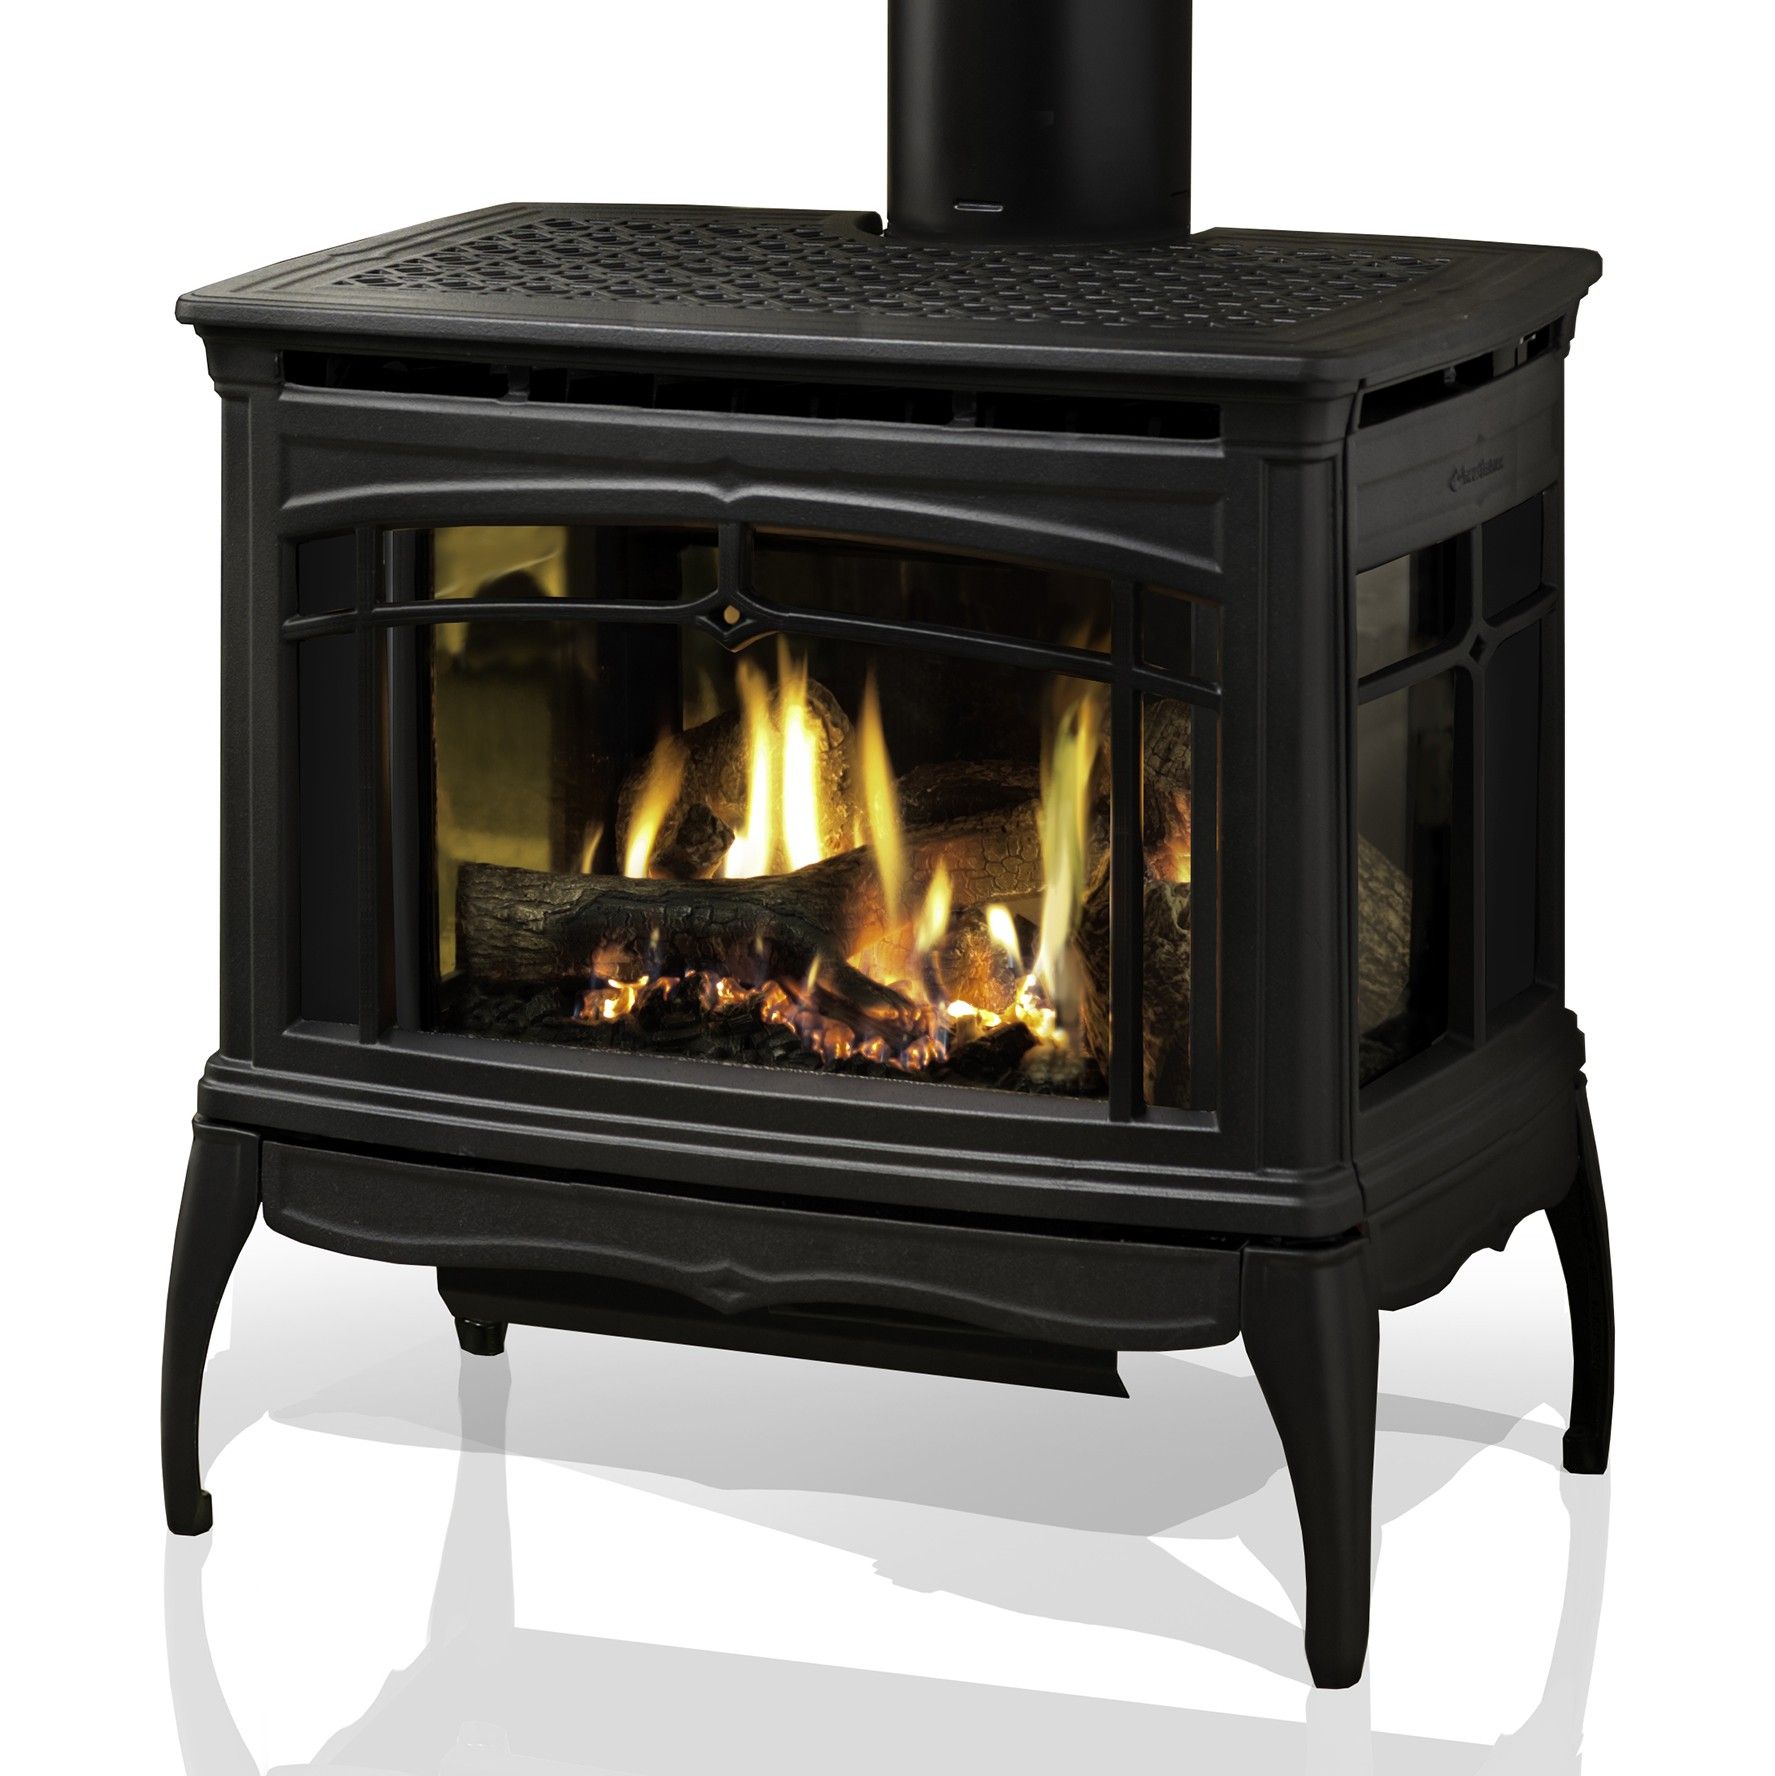 Wood Stove In Fireplace Vs Insert Unique Hearthstone Waitsfield Dx 8770 Gas Stove